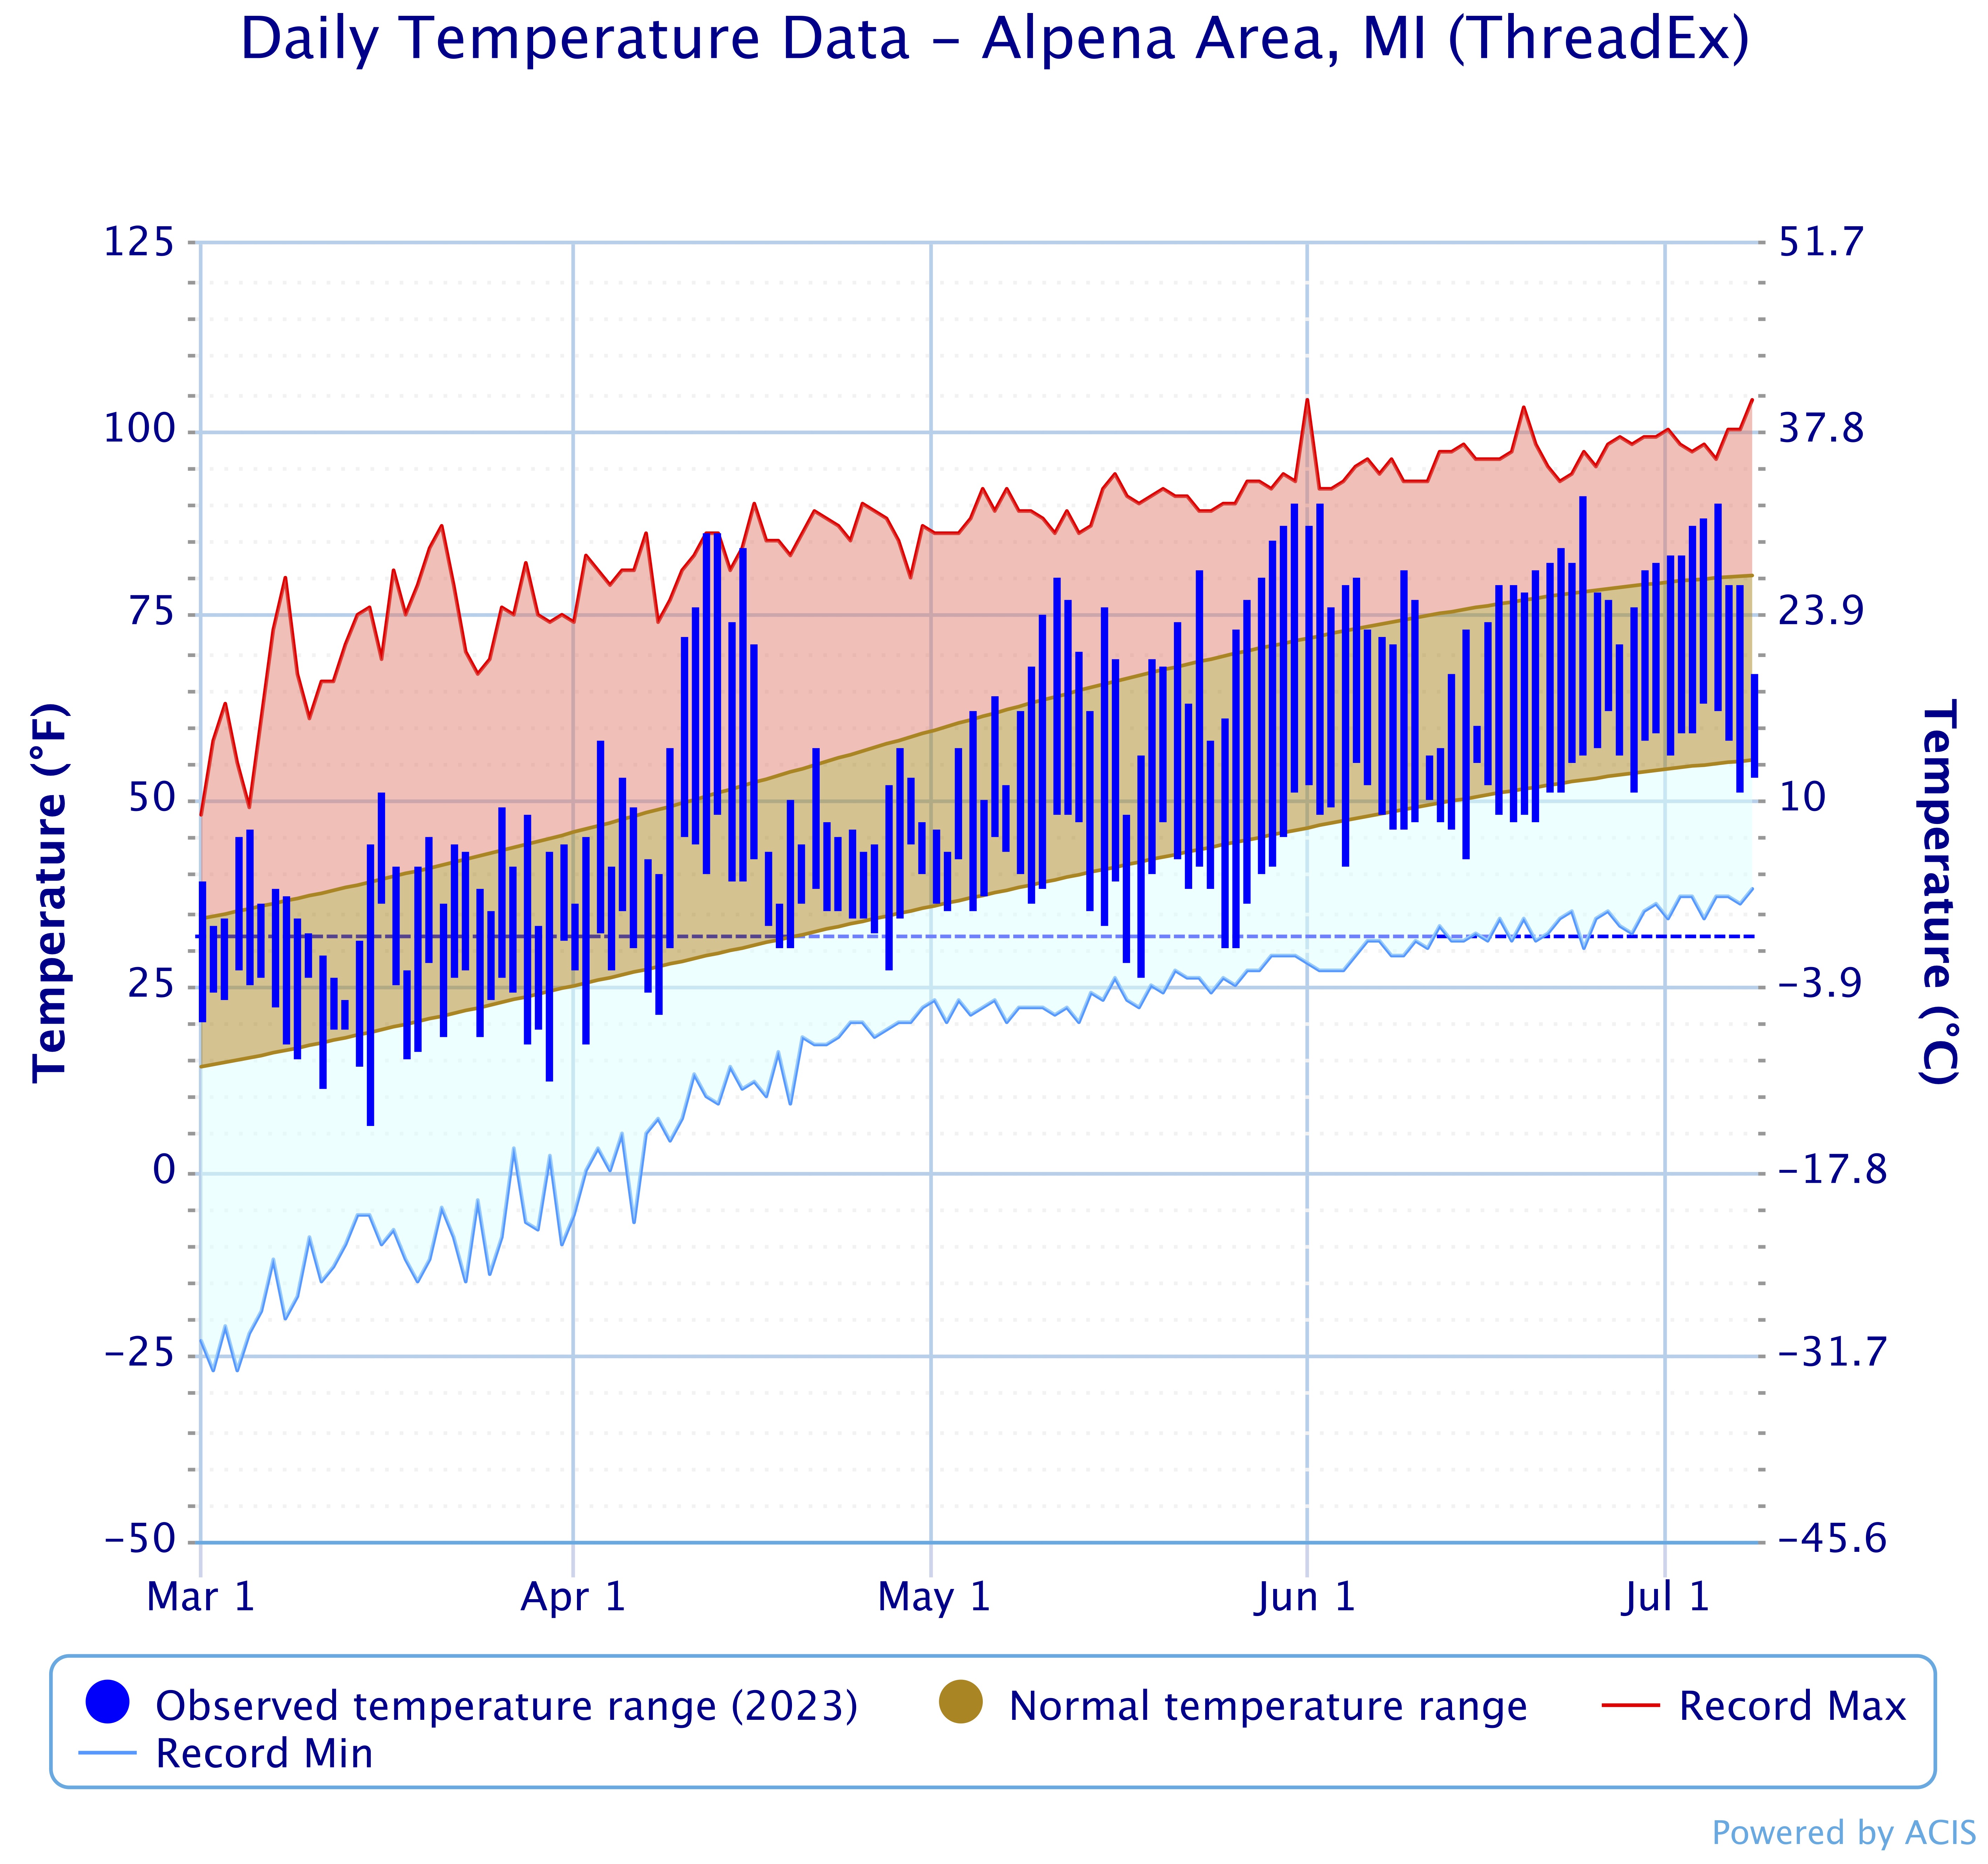 Daily temperature chart from March 1-July 8, 2023 with average low and high temperatures